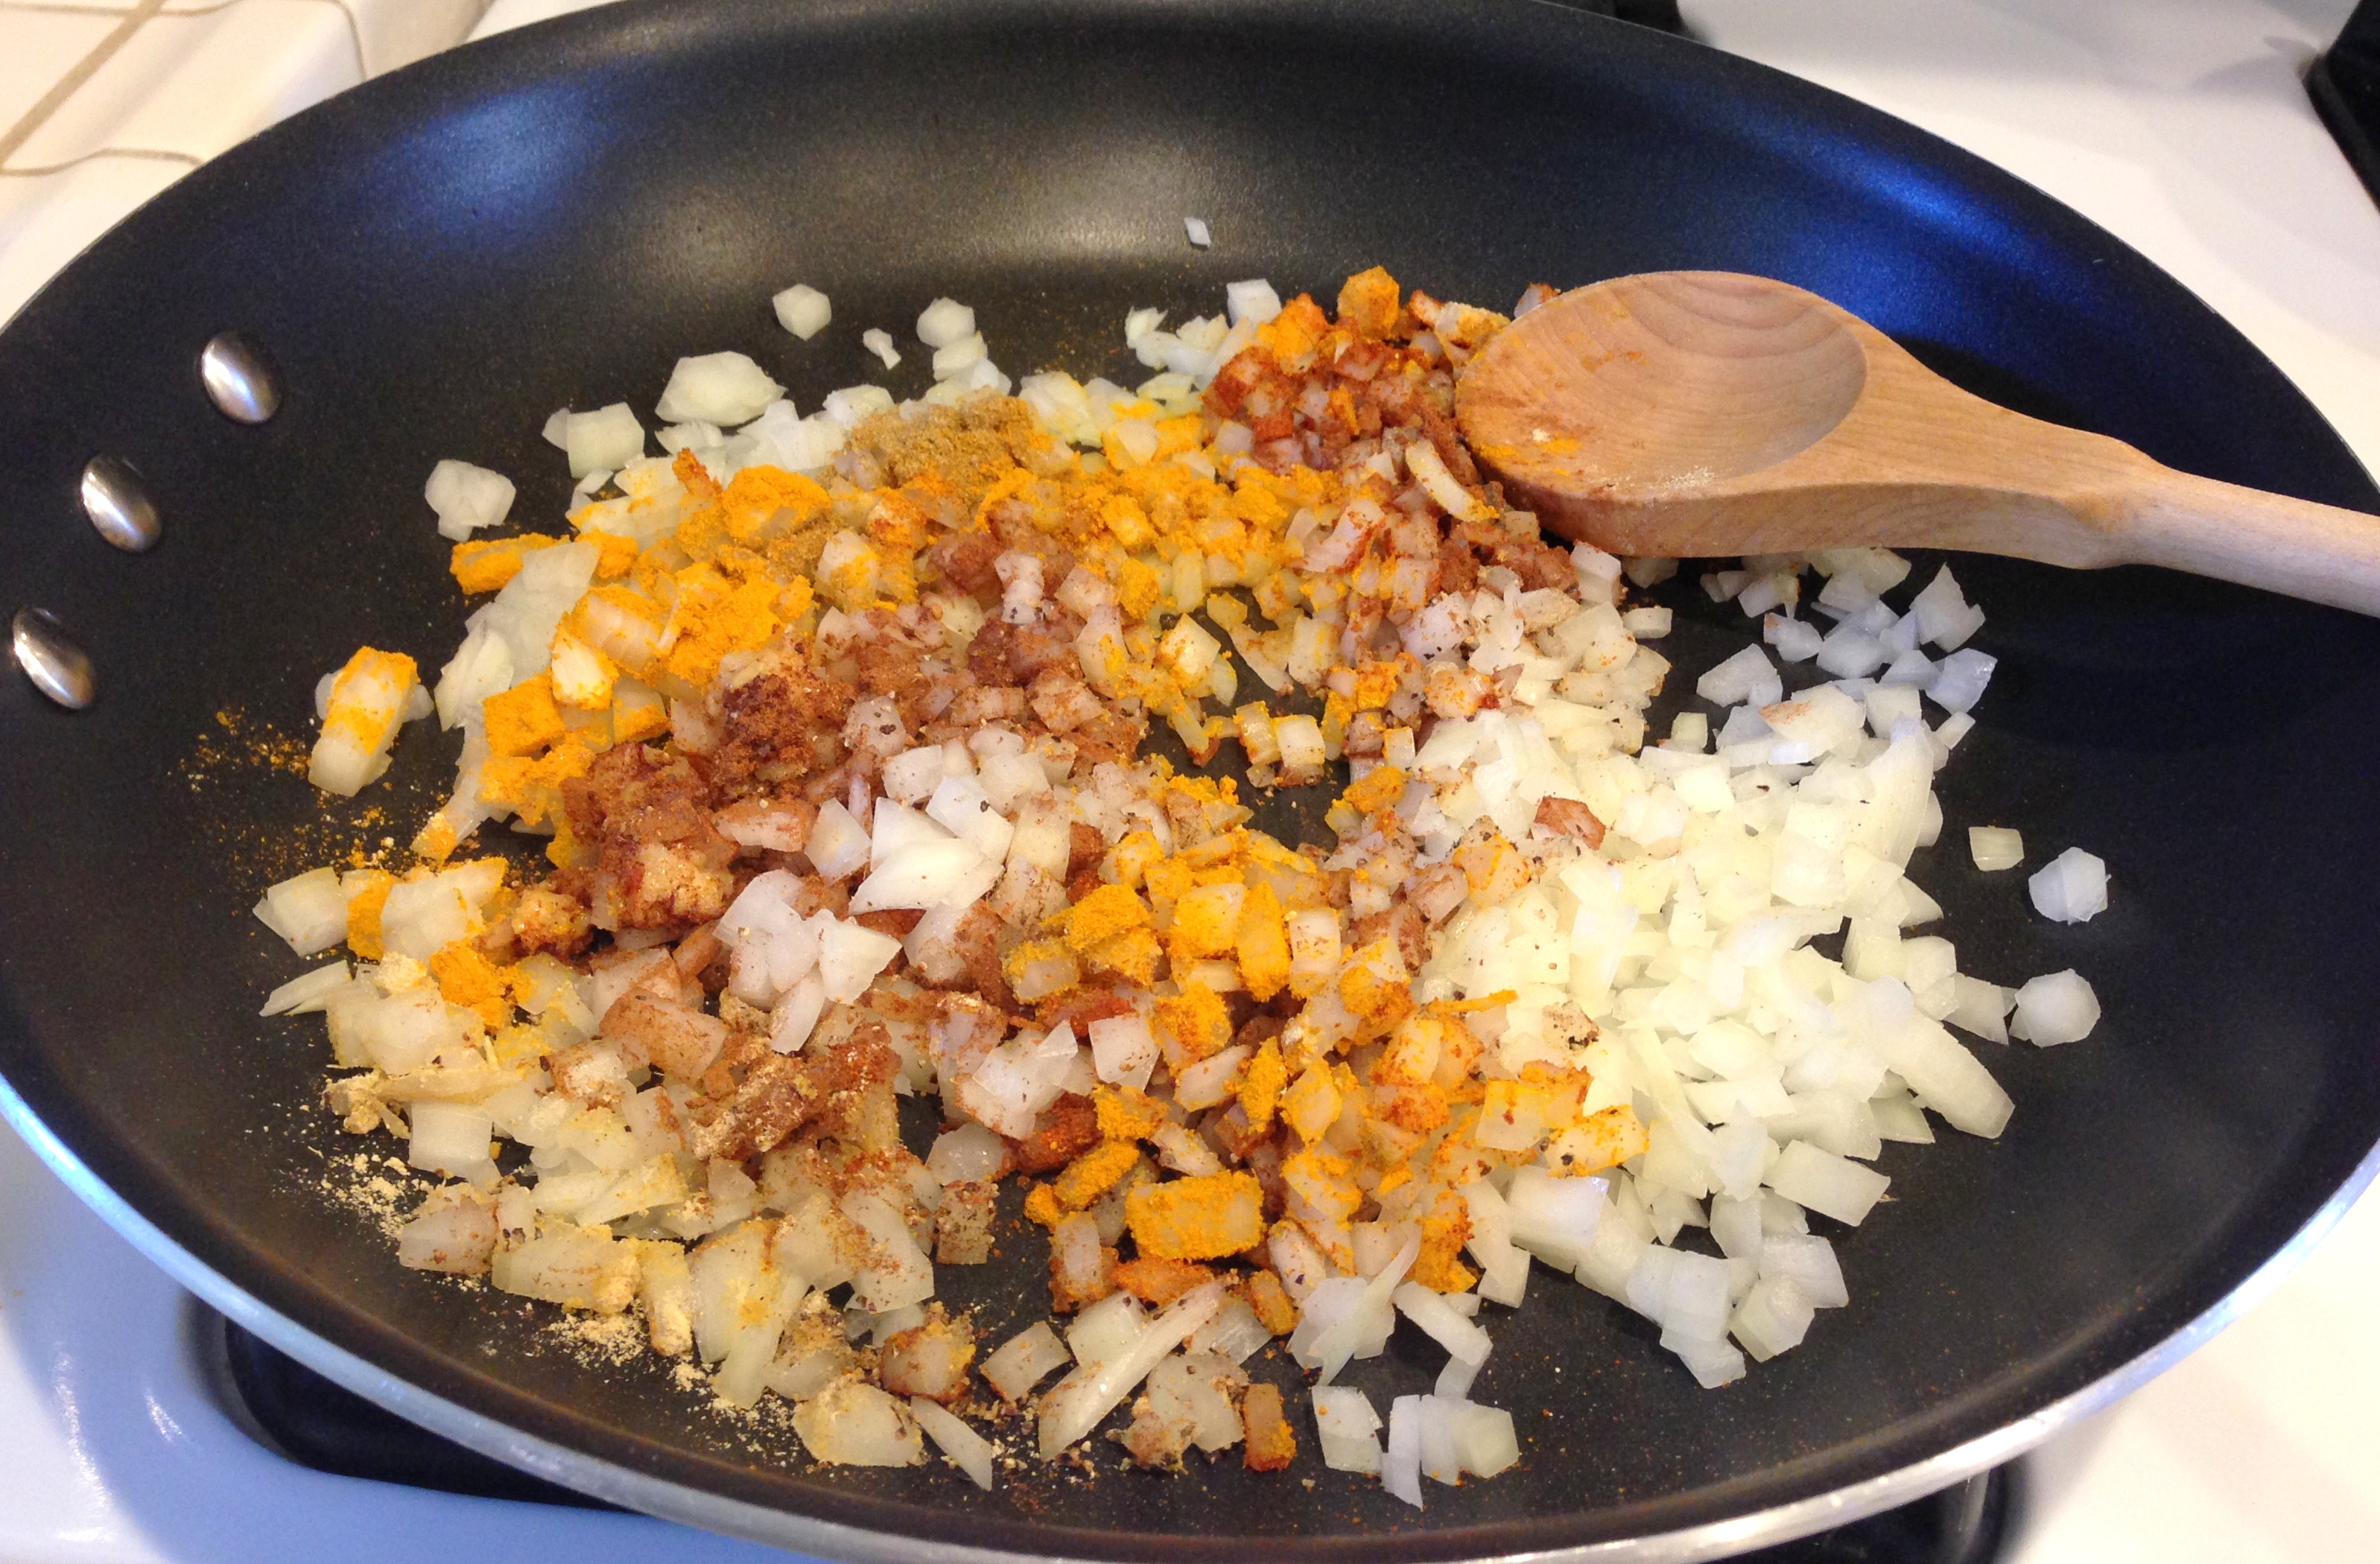 Saute onions and spices